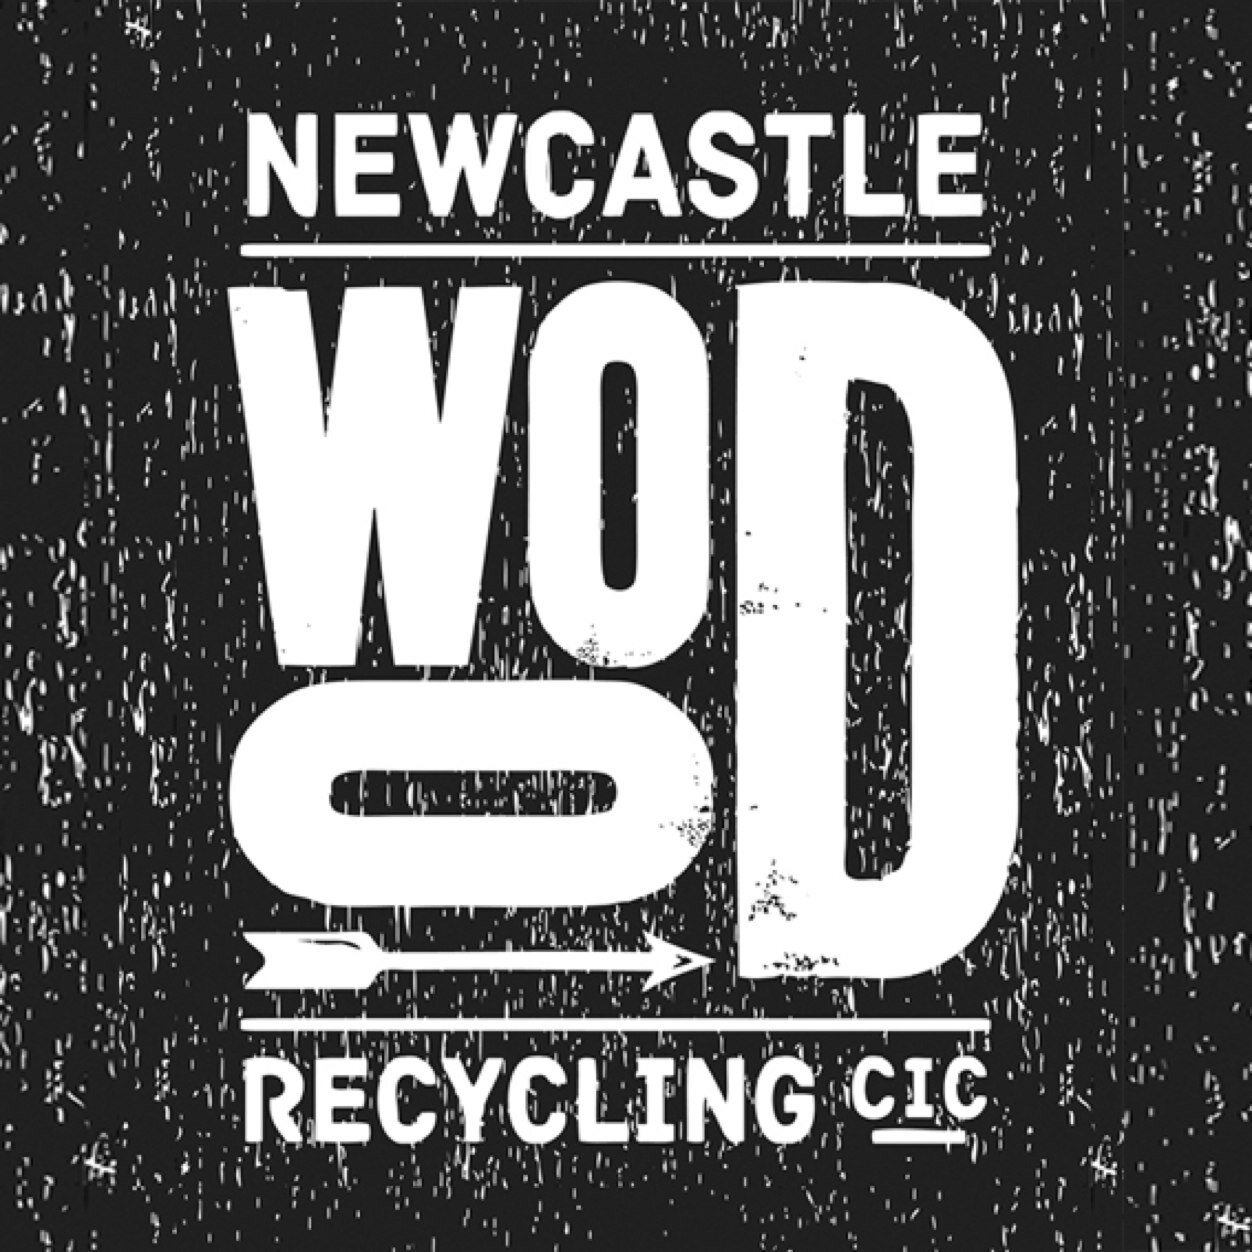 🌳 Community Wood Recyclers  ♻️ Reclaimed Timber Yard  ⚒ Outdoor Furniture & Shop Fits 👷🏽‍♀️ Volunteer  ☕️ Cafe Coming Soon!